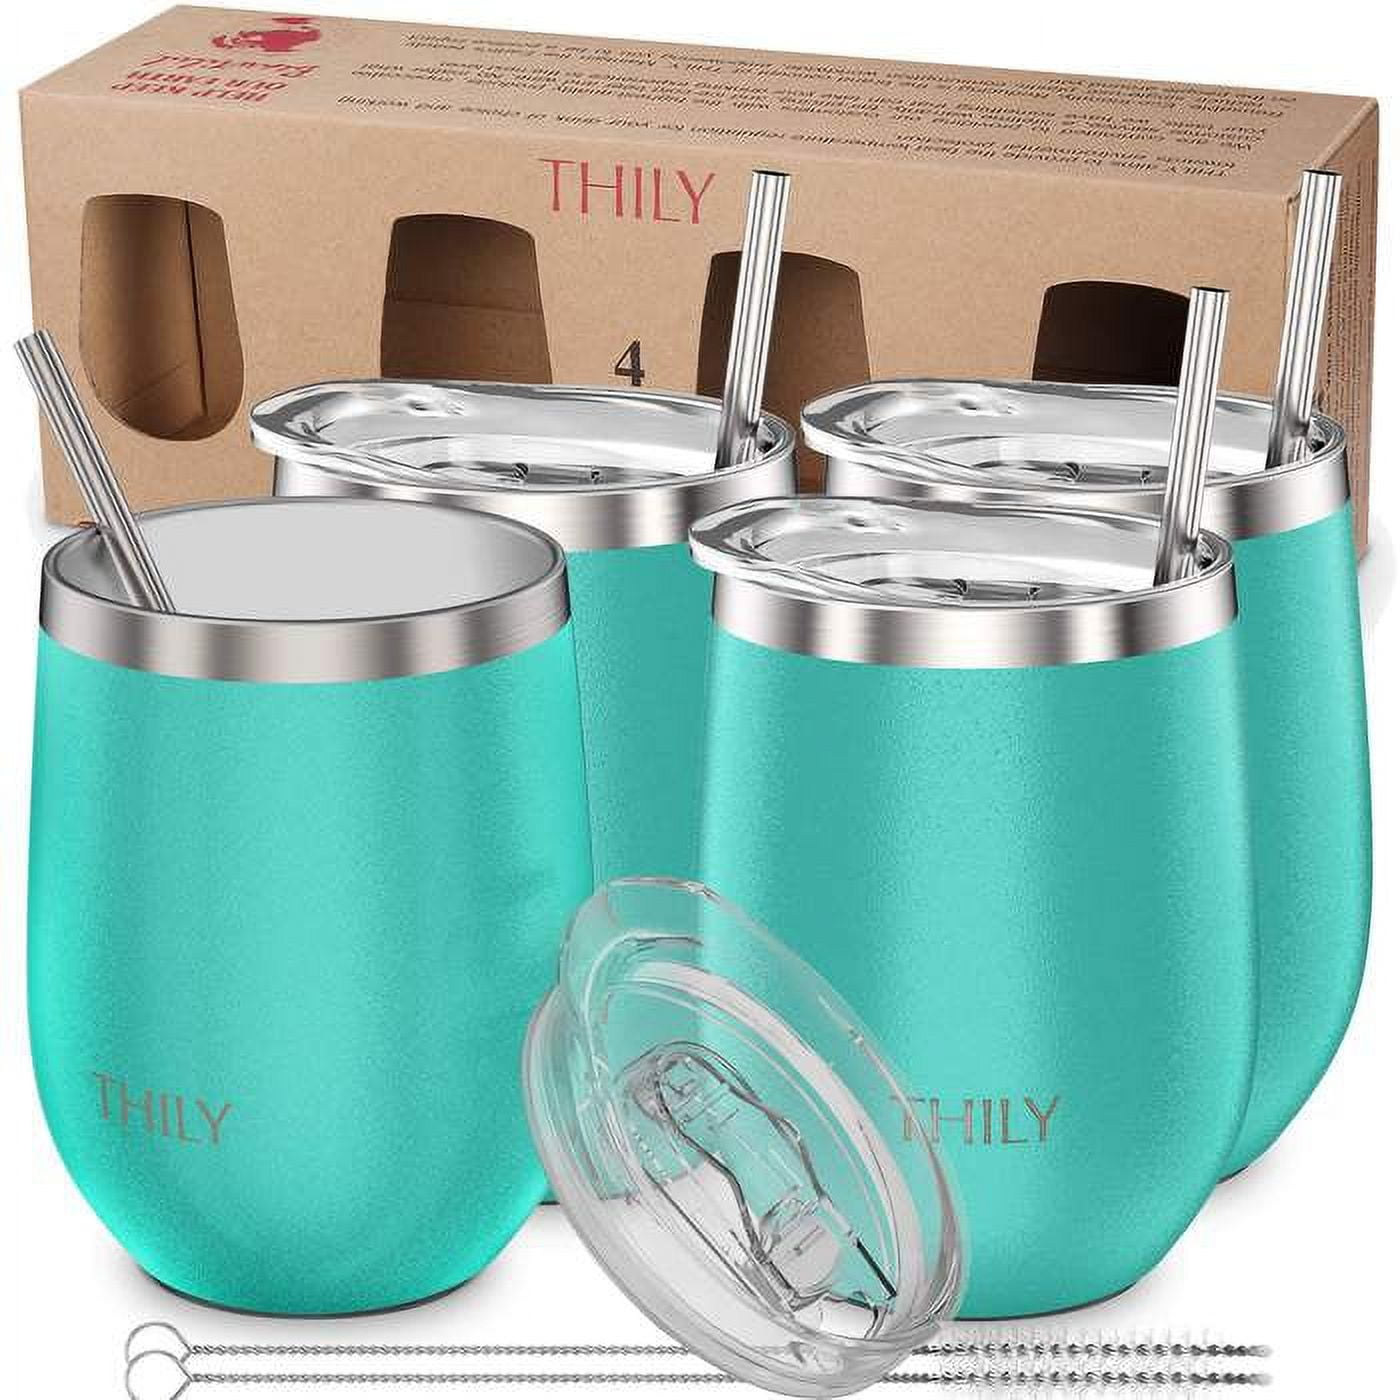 THILY Wine Tumbler丨 Cheers Set 2 Pack丨Purple + Blue by THILY